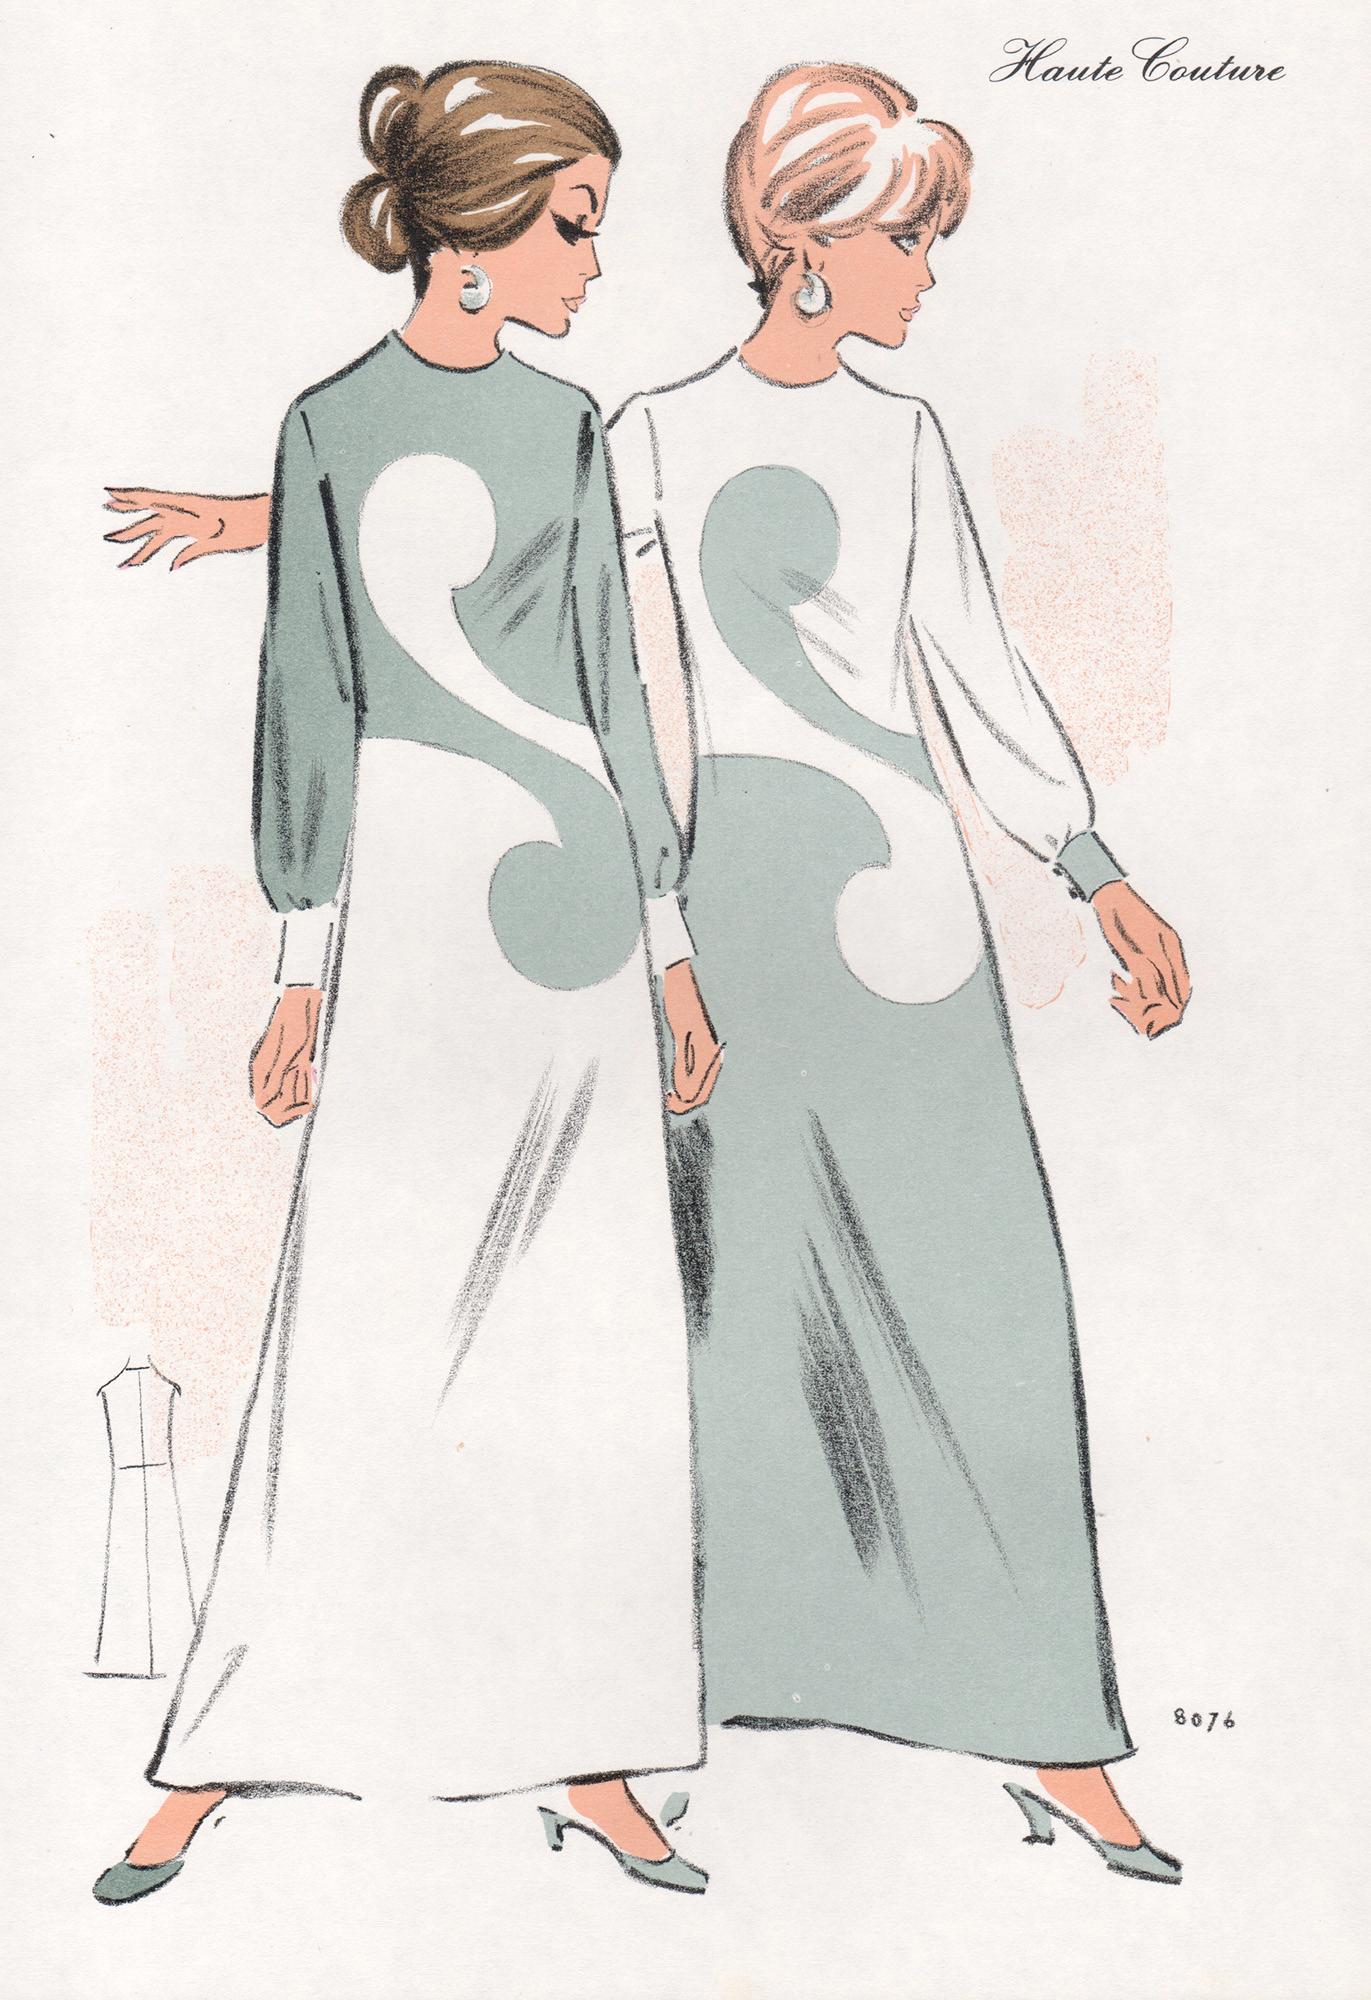 Original colour lithograph of a French fashion design from 'Haute Couture'. Published in a folio of designs for Summer 1971. 

32cm by 22cm (sheet)